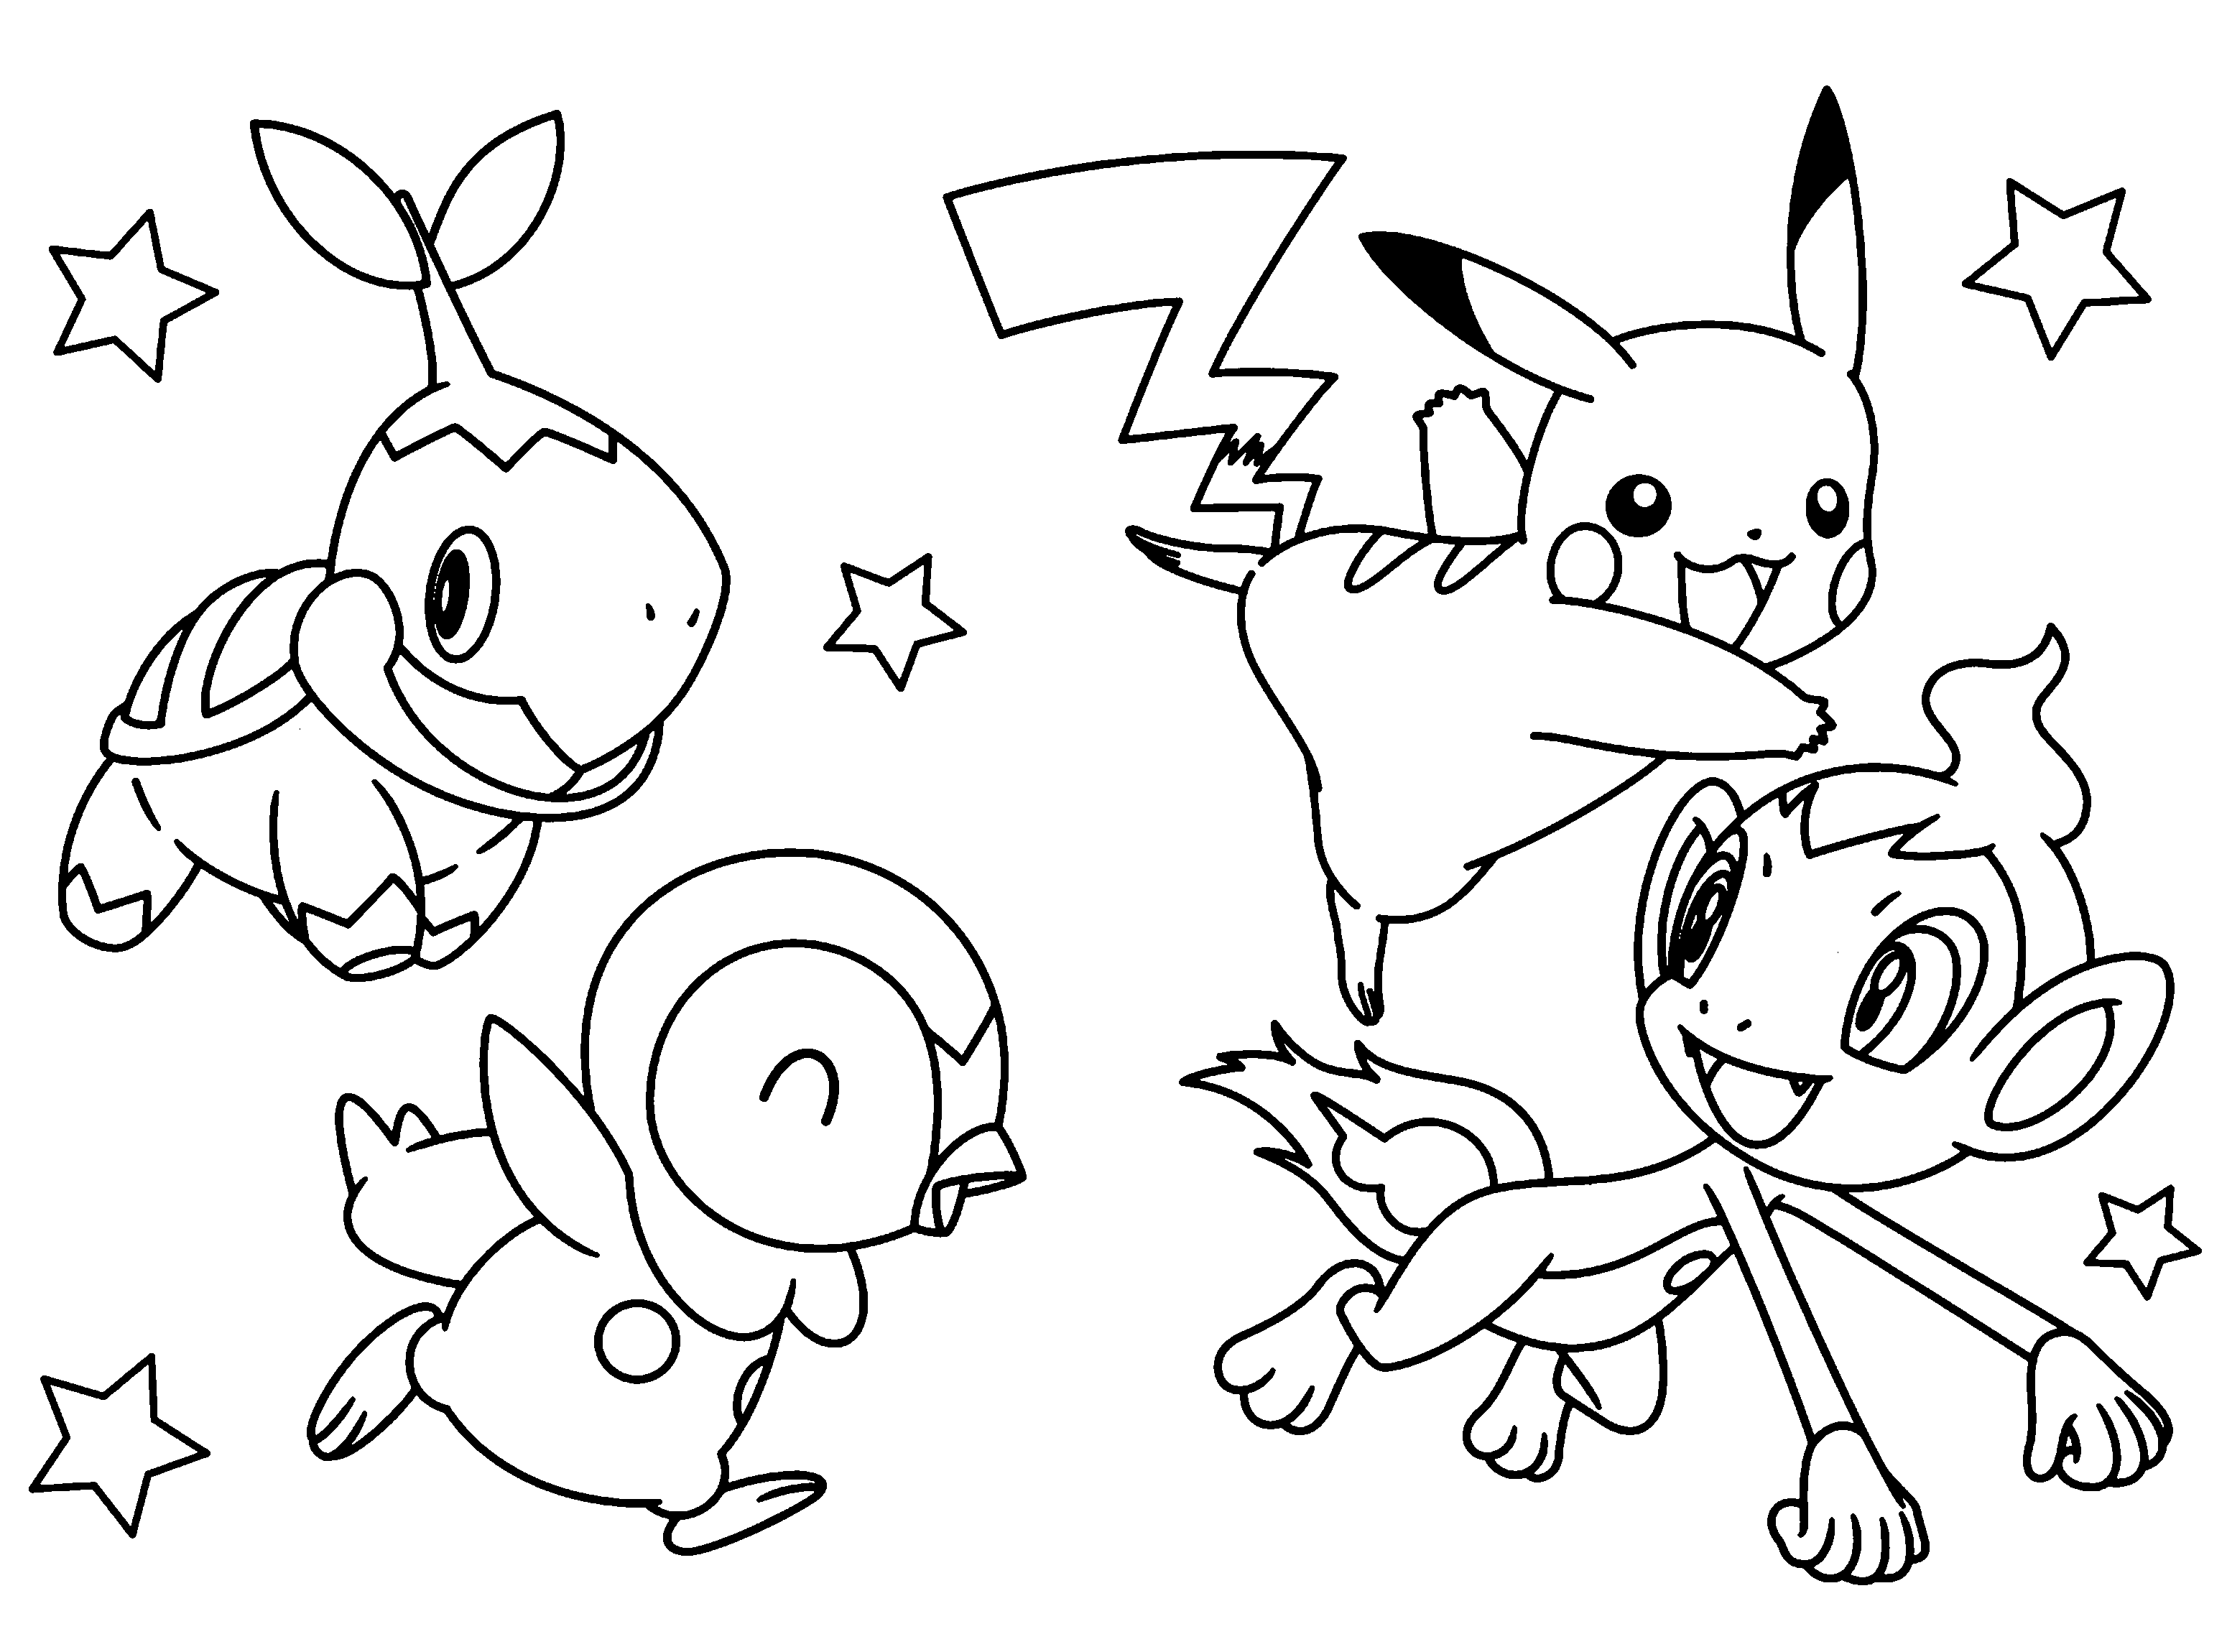 Piplup Printables - Coloring Pages for Kids and for Adults